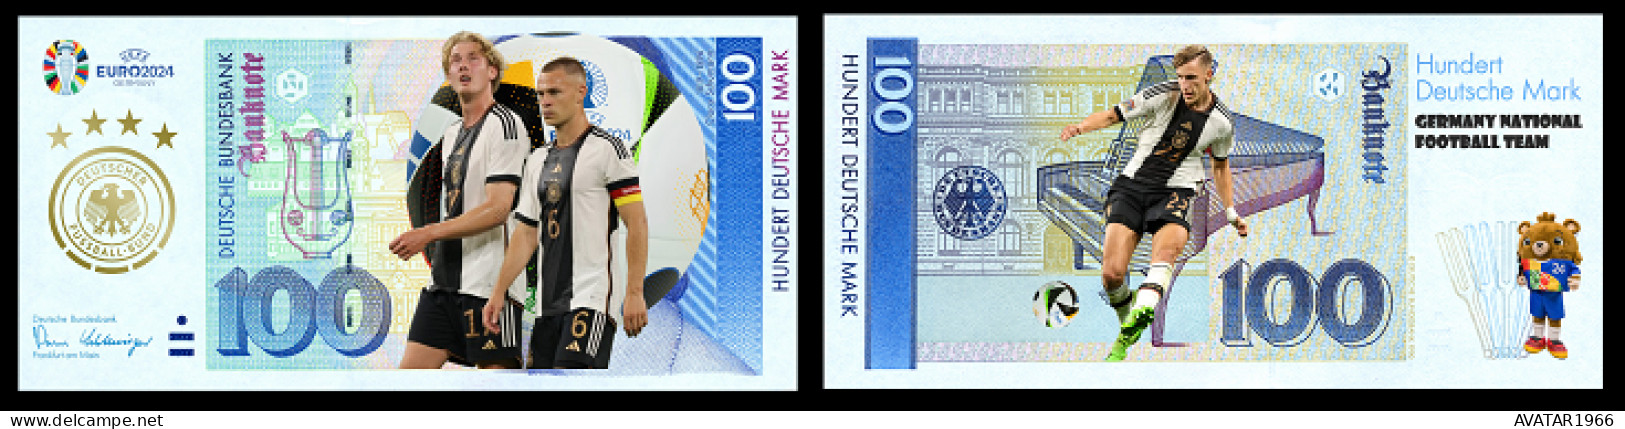 UEFA European Football Championship 2024 qualified country  Germany  8 pieces Germany fantasy paper money